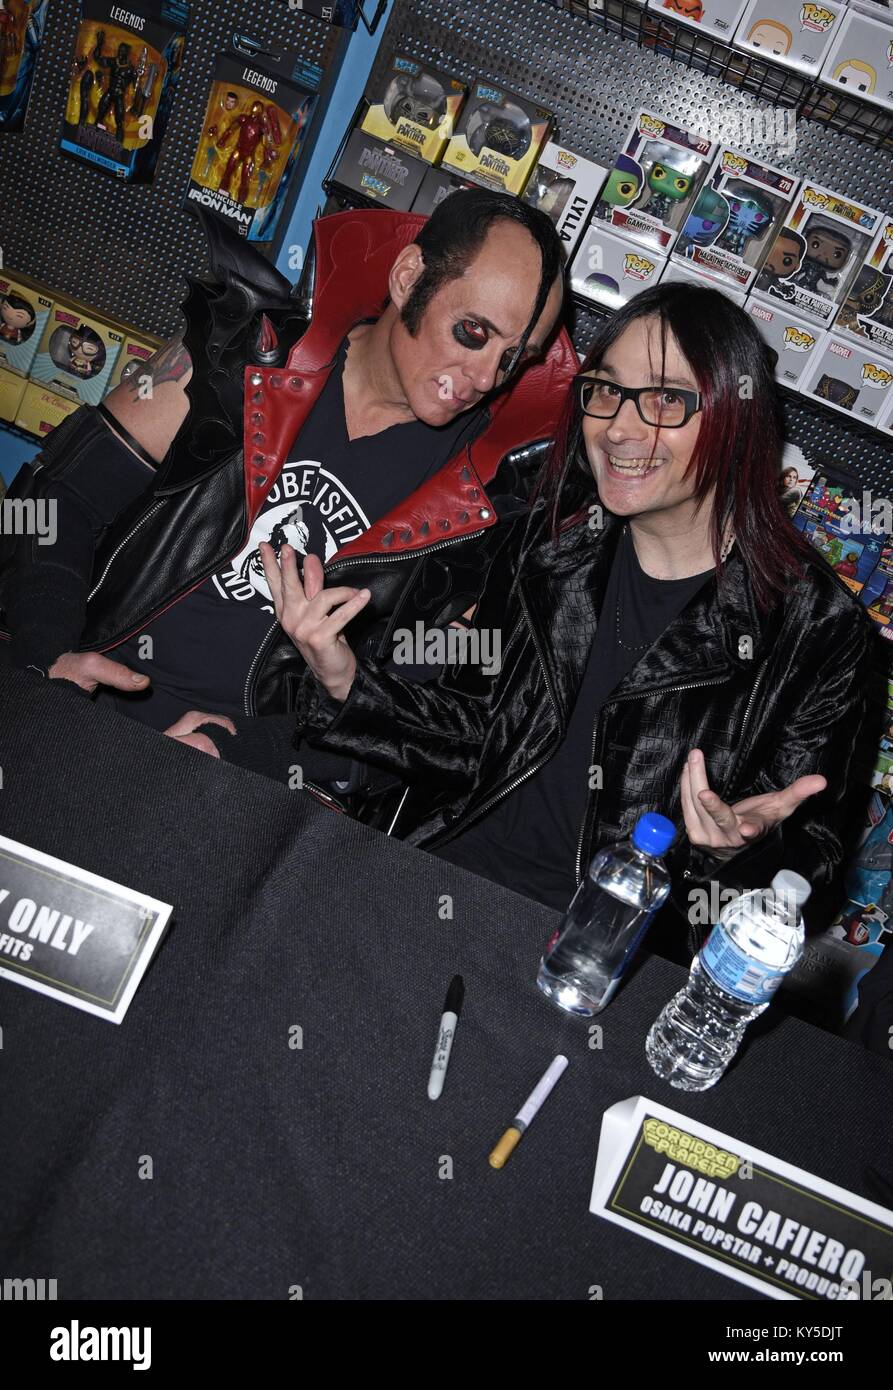 New York, NY, USA. 11th Jan, 2018. Jerry Only, The Misfits, John Cafiero at arrivals for Dr. Demento Covered in Punk Release Party, Forbidden Planet, New York, NY January 11, 2018. Credit: Derek Storm/Everett Collection/Alamy Live News Stock Photo